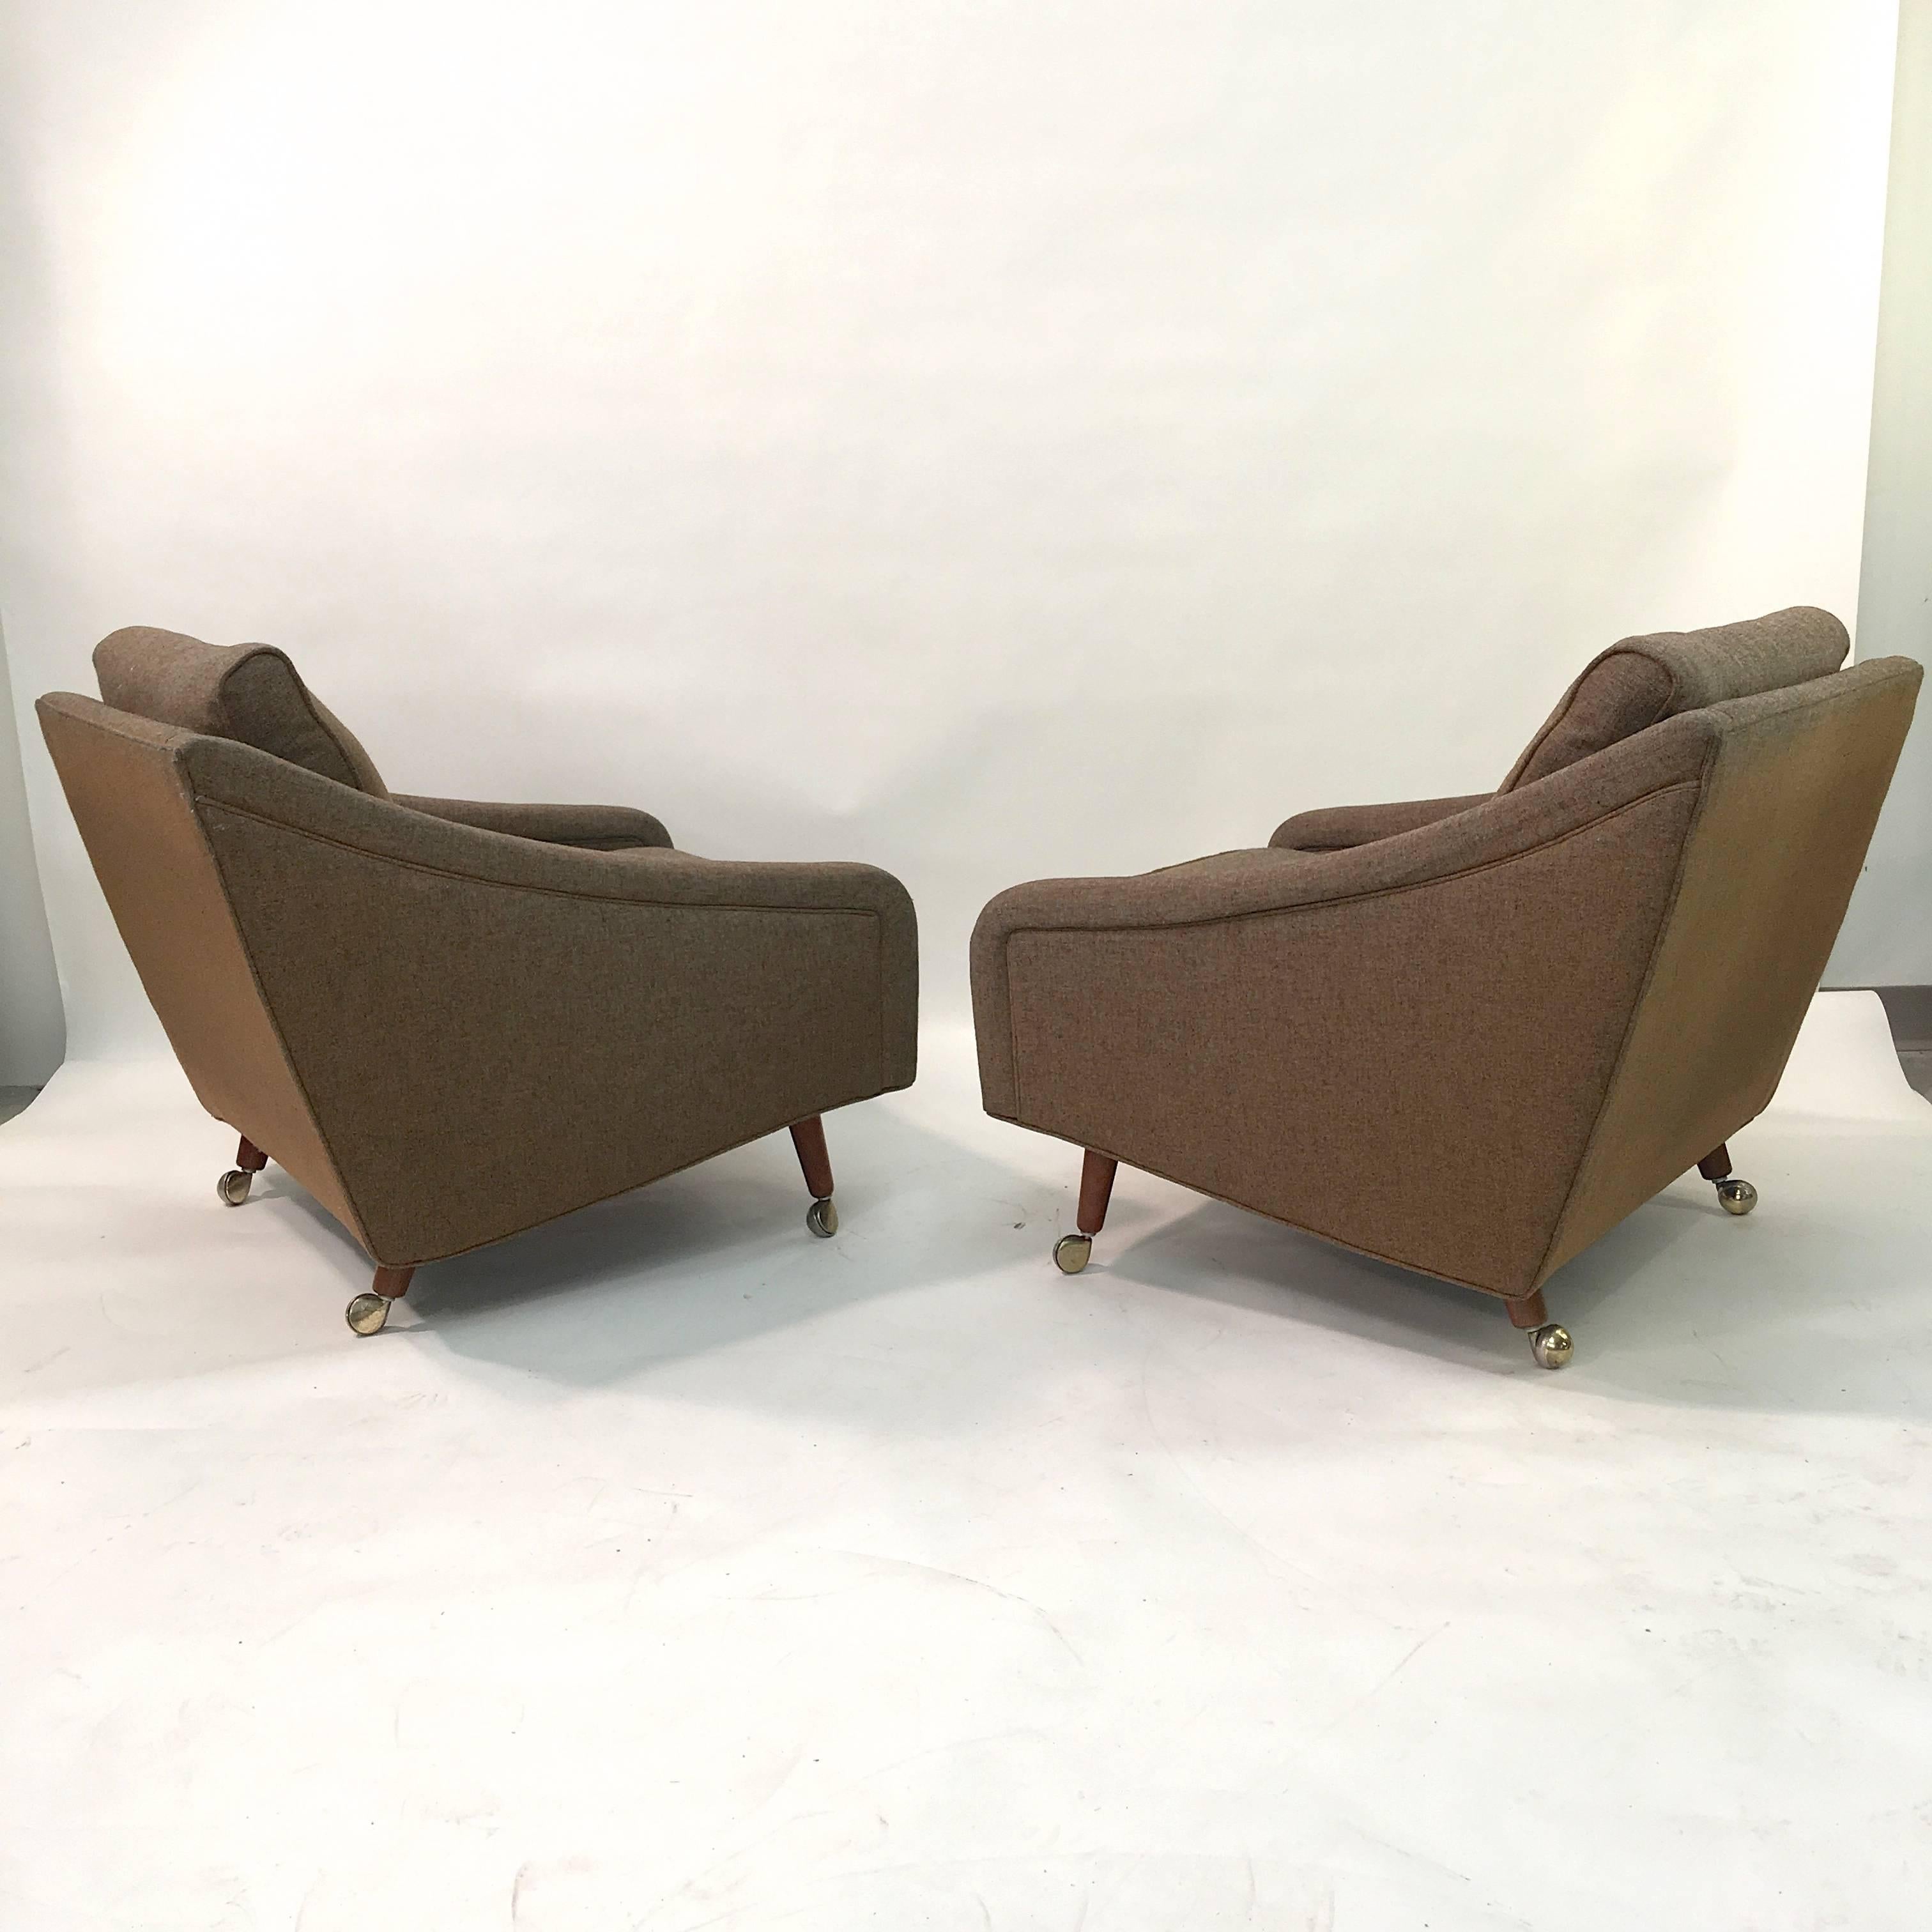 Uncommon pair of 1965 Milo Baughman for Thayer Coggin upholstered lounge chairs with casters on all four feet. Very attractive silhouette. Original loden green wool fabric and original labels present on both chairs.